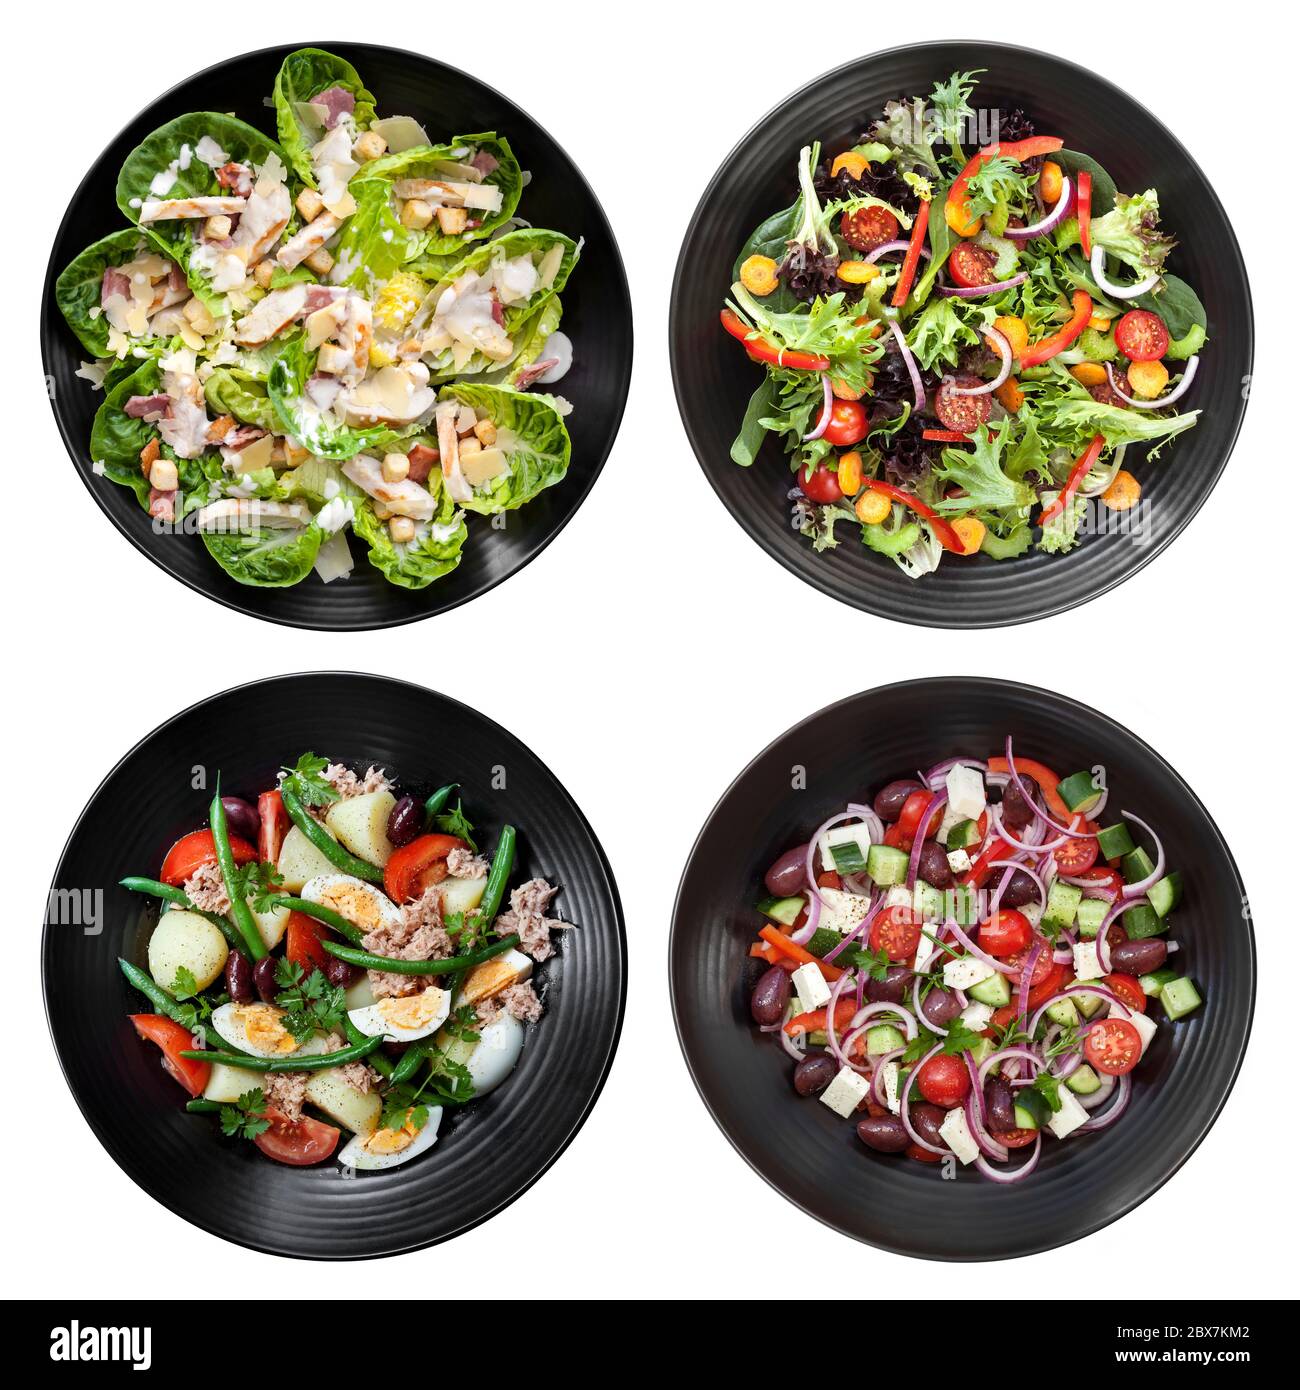 Set of different salads on white background.  Includes chicken caesar, garden, nicoise, and Greek. Stock Photo